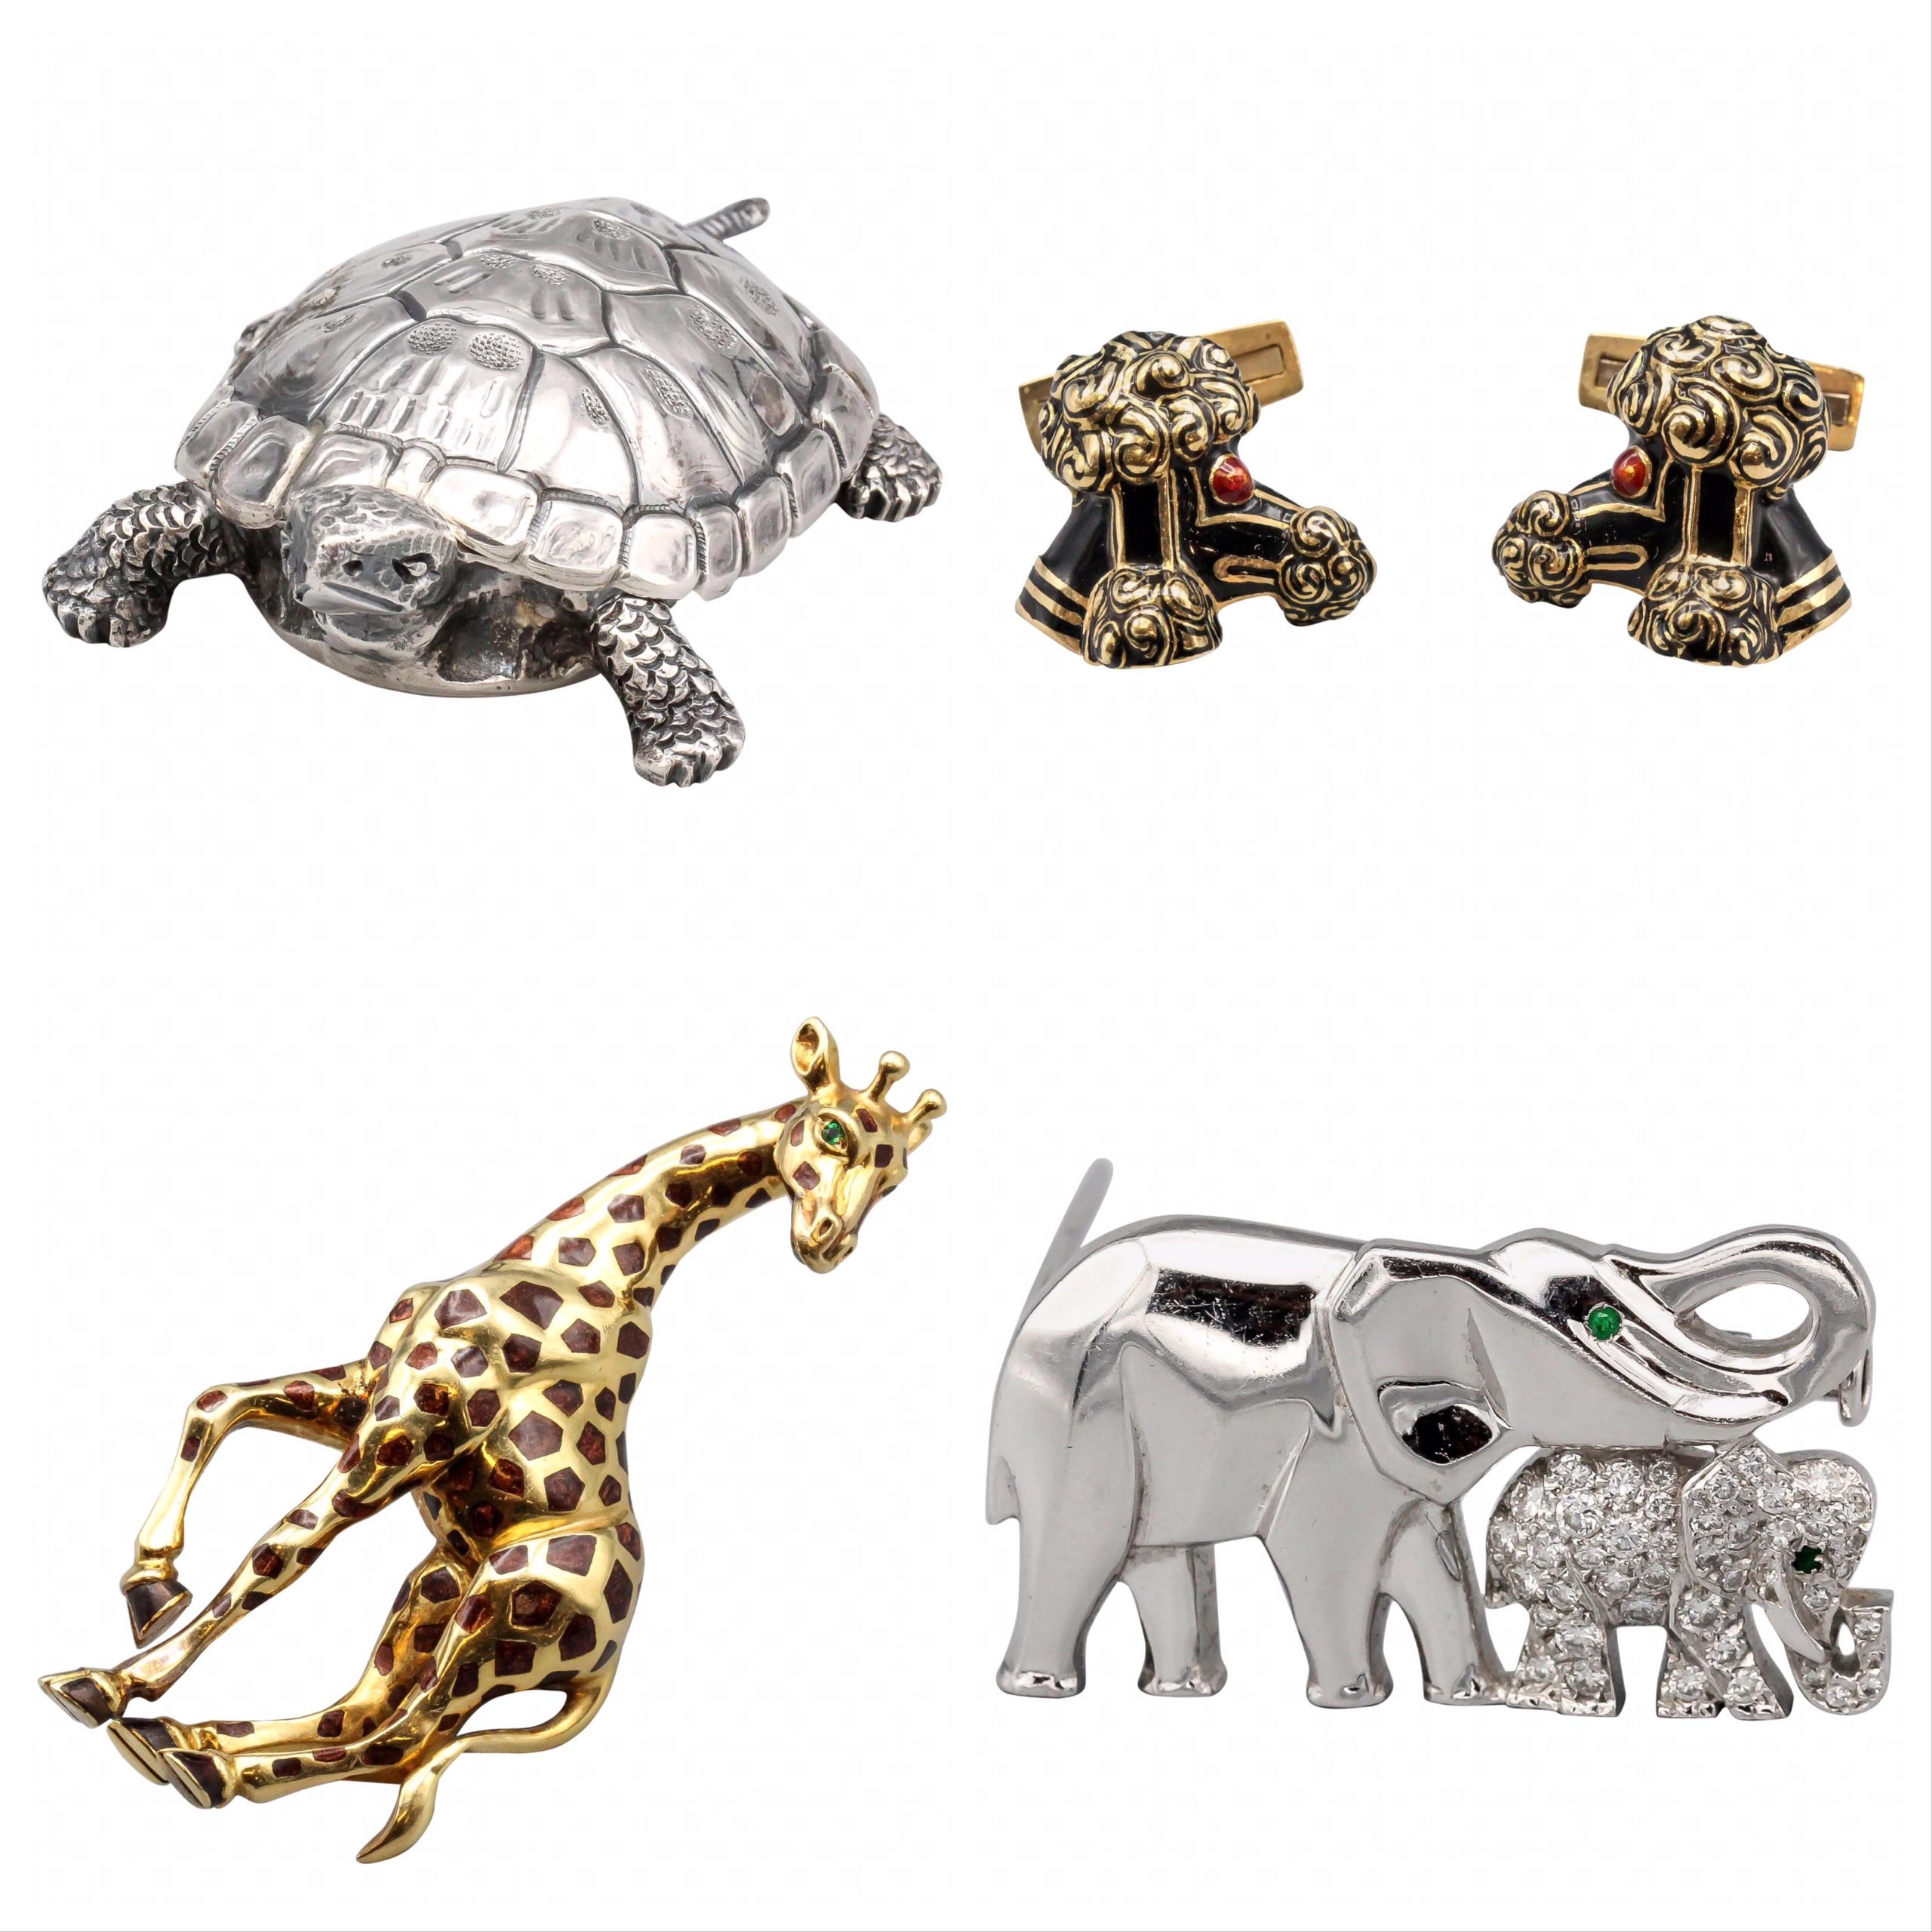 Buccellati Midcentury Sterling Silver Turtle Box, circa 1950-60s, David Webb 18 Karat Gold and Enamel French Poodle Cufflinks, Cartier Diamond Emerald and 18 Karat White Gold Elephant Mother Brooch, Cartier Emerald Enamel 18 Karat Gold Giraffe Brooch. 